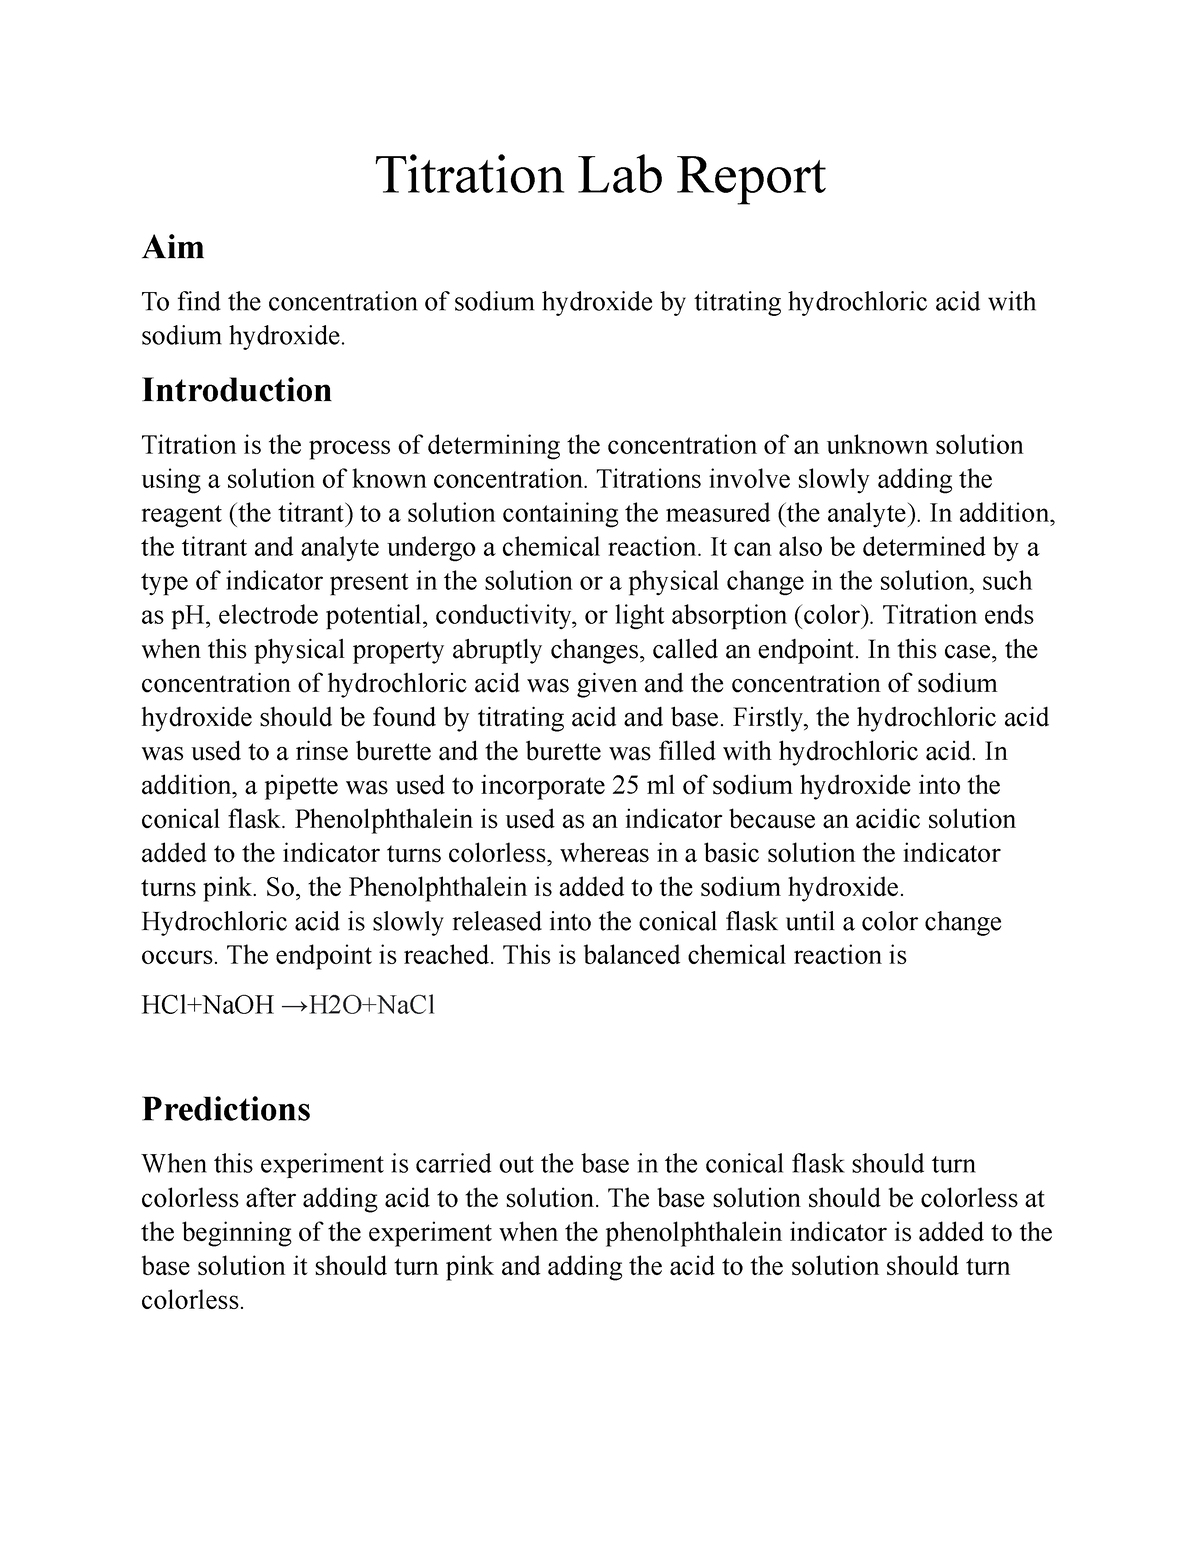 example of a lab report on titration